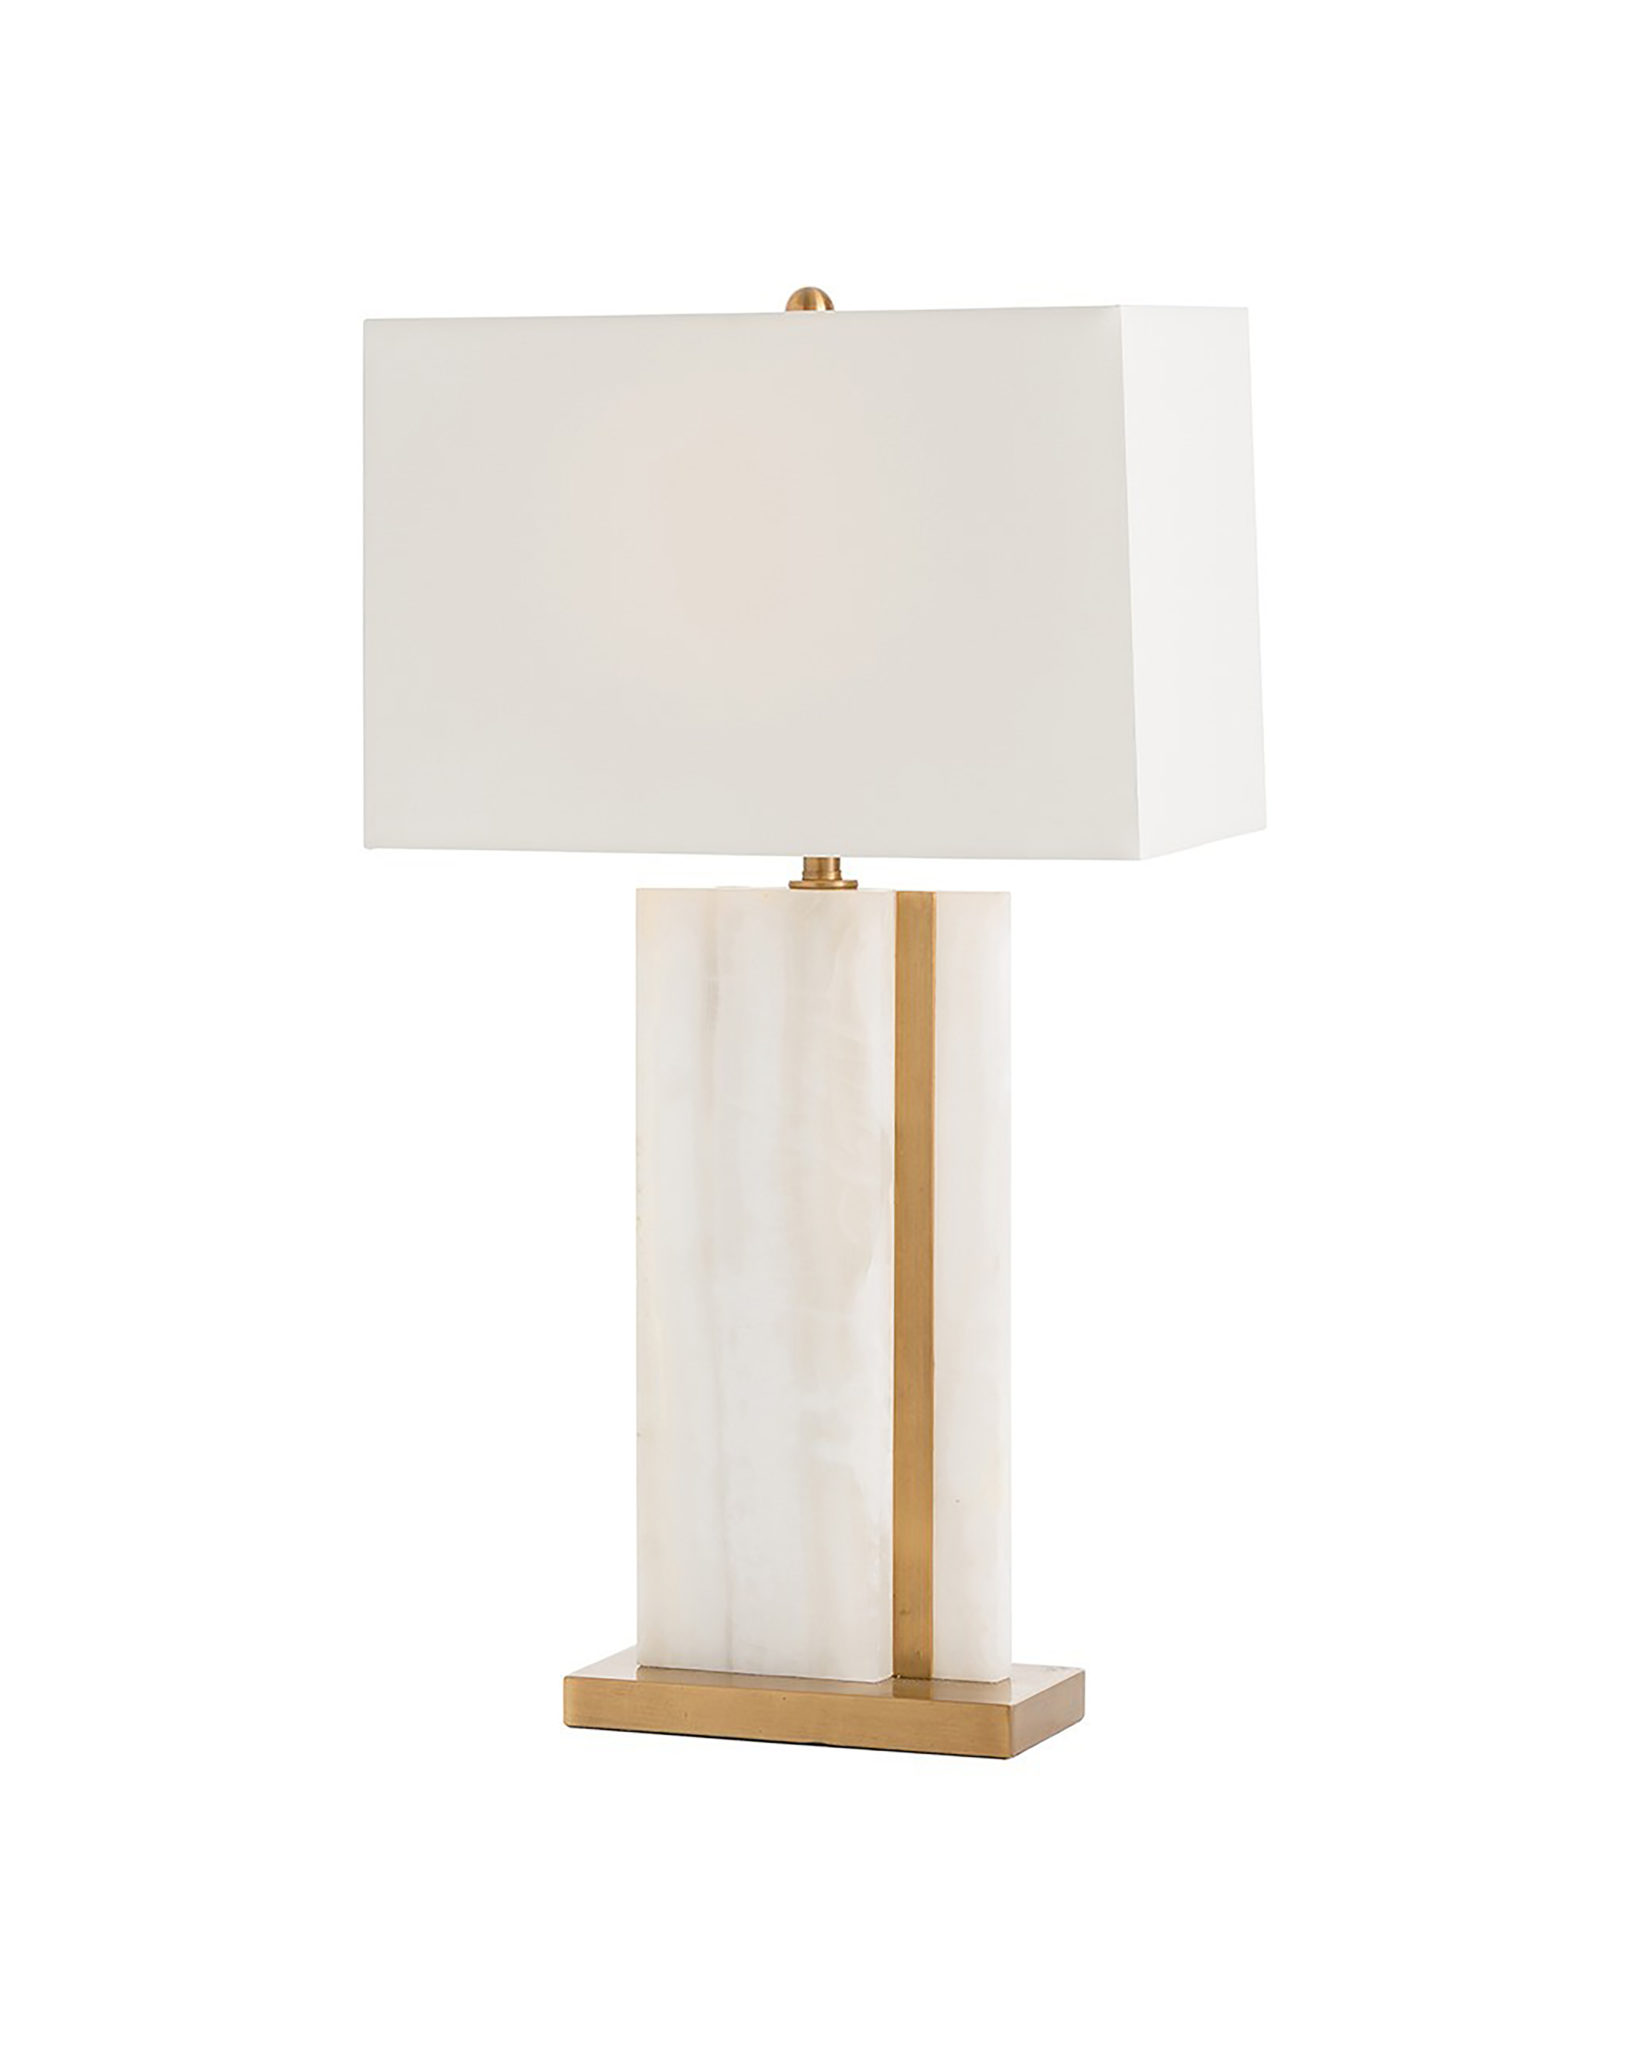 White lamp with bronze detailing